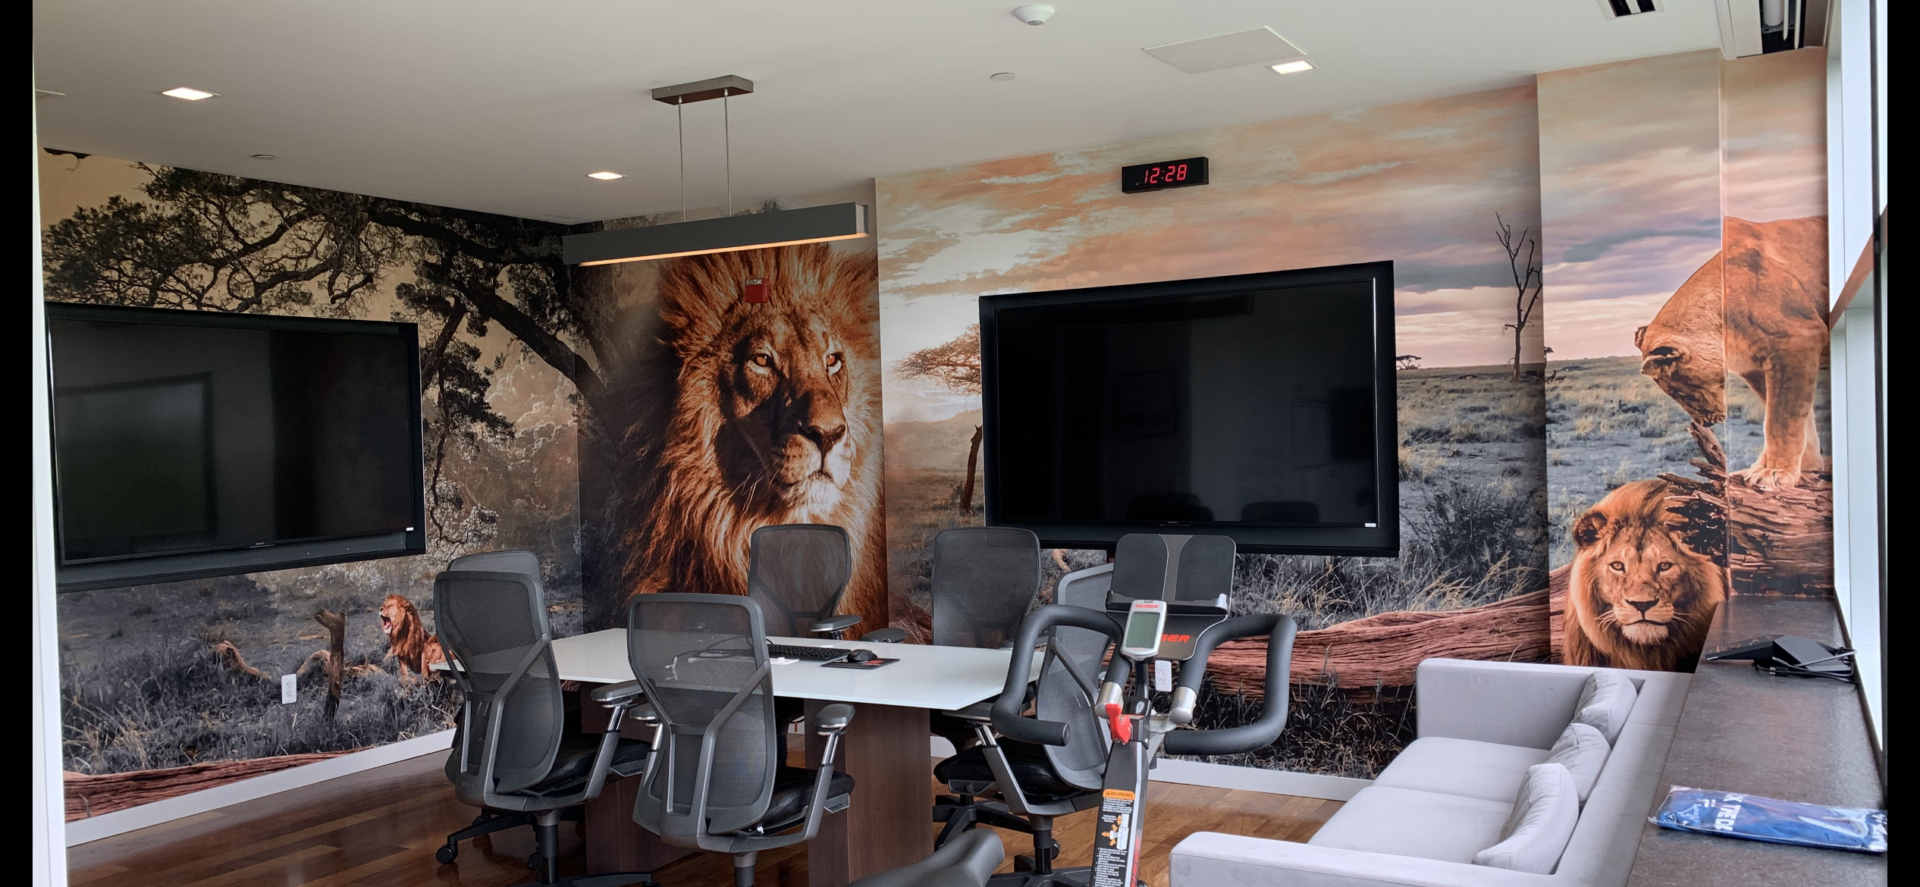 A room with a large screen tv and a wall mural.